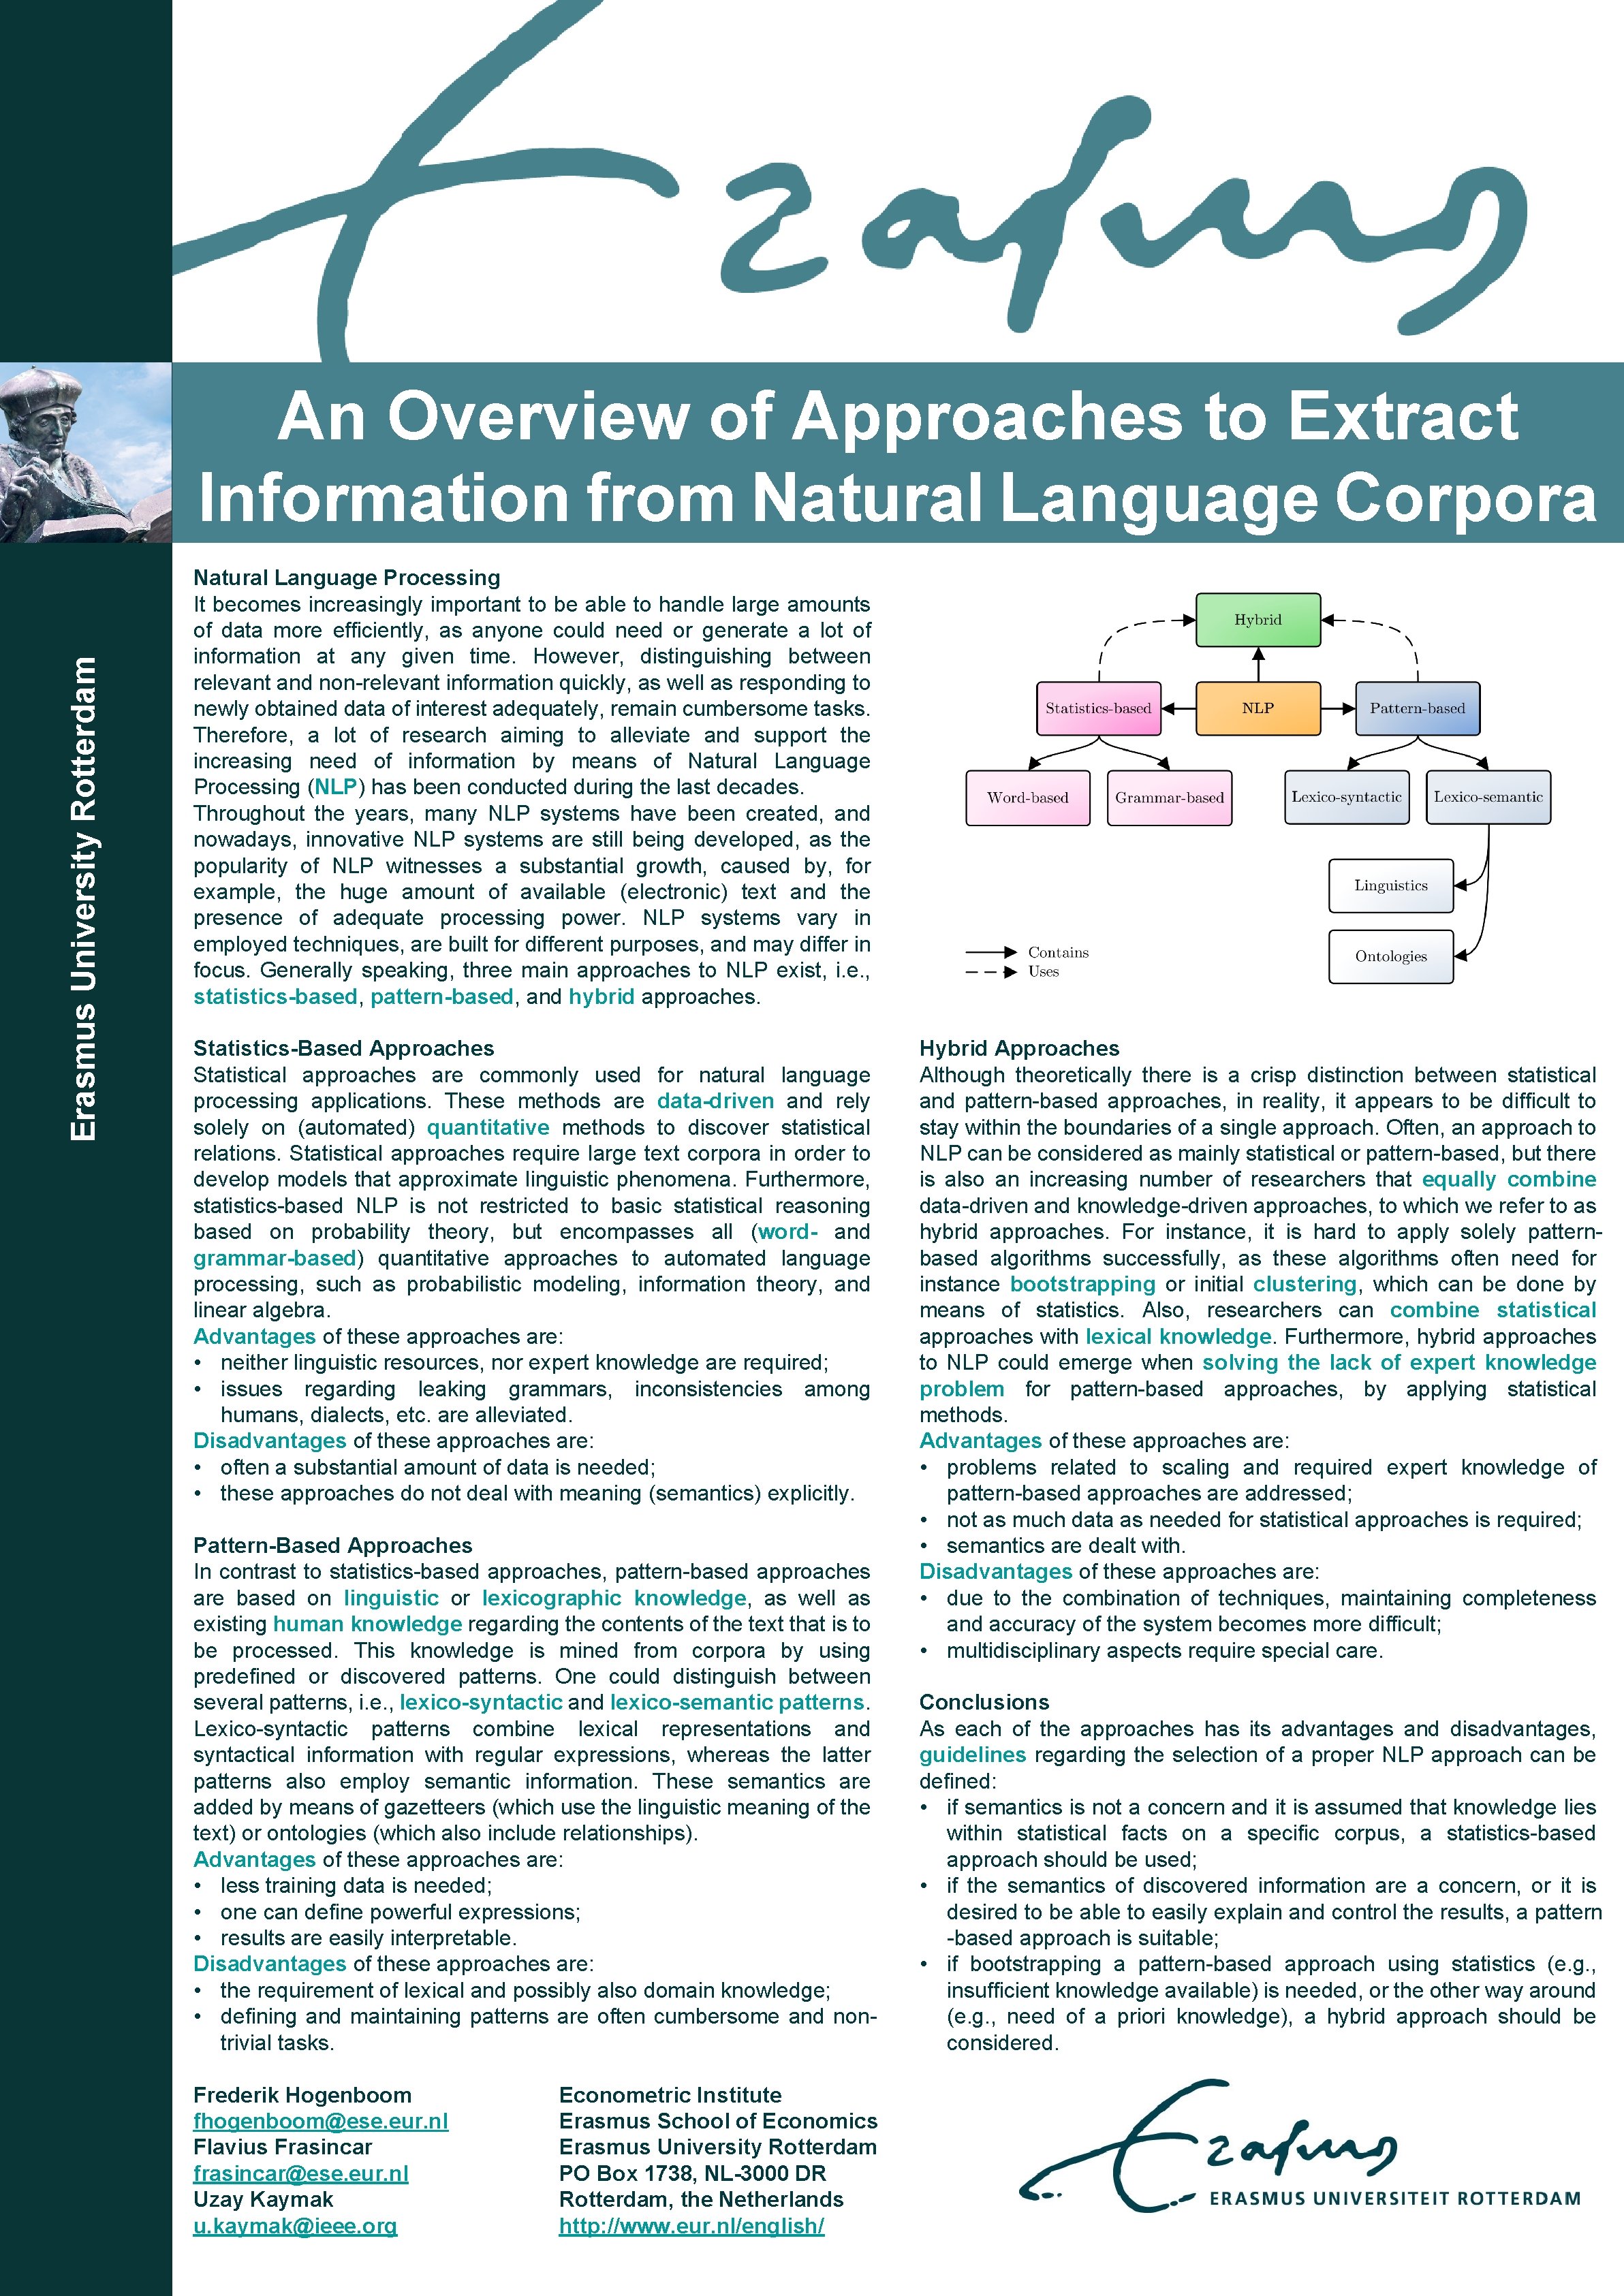 Erasmus University Rotterdam An Overview of Approaches to Extract Information from Natural Language Corpora